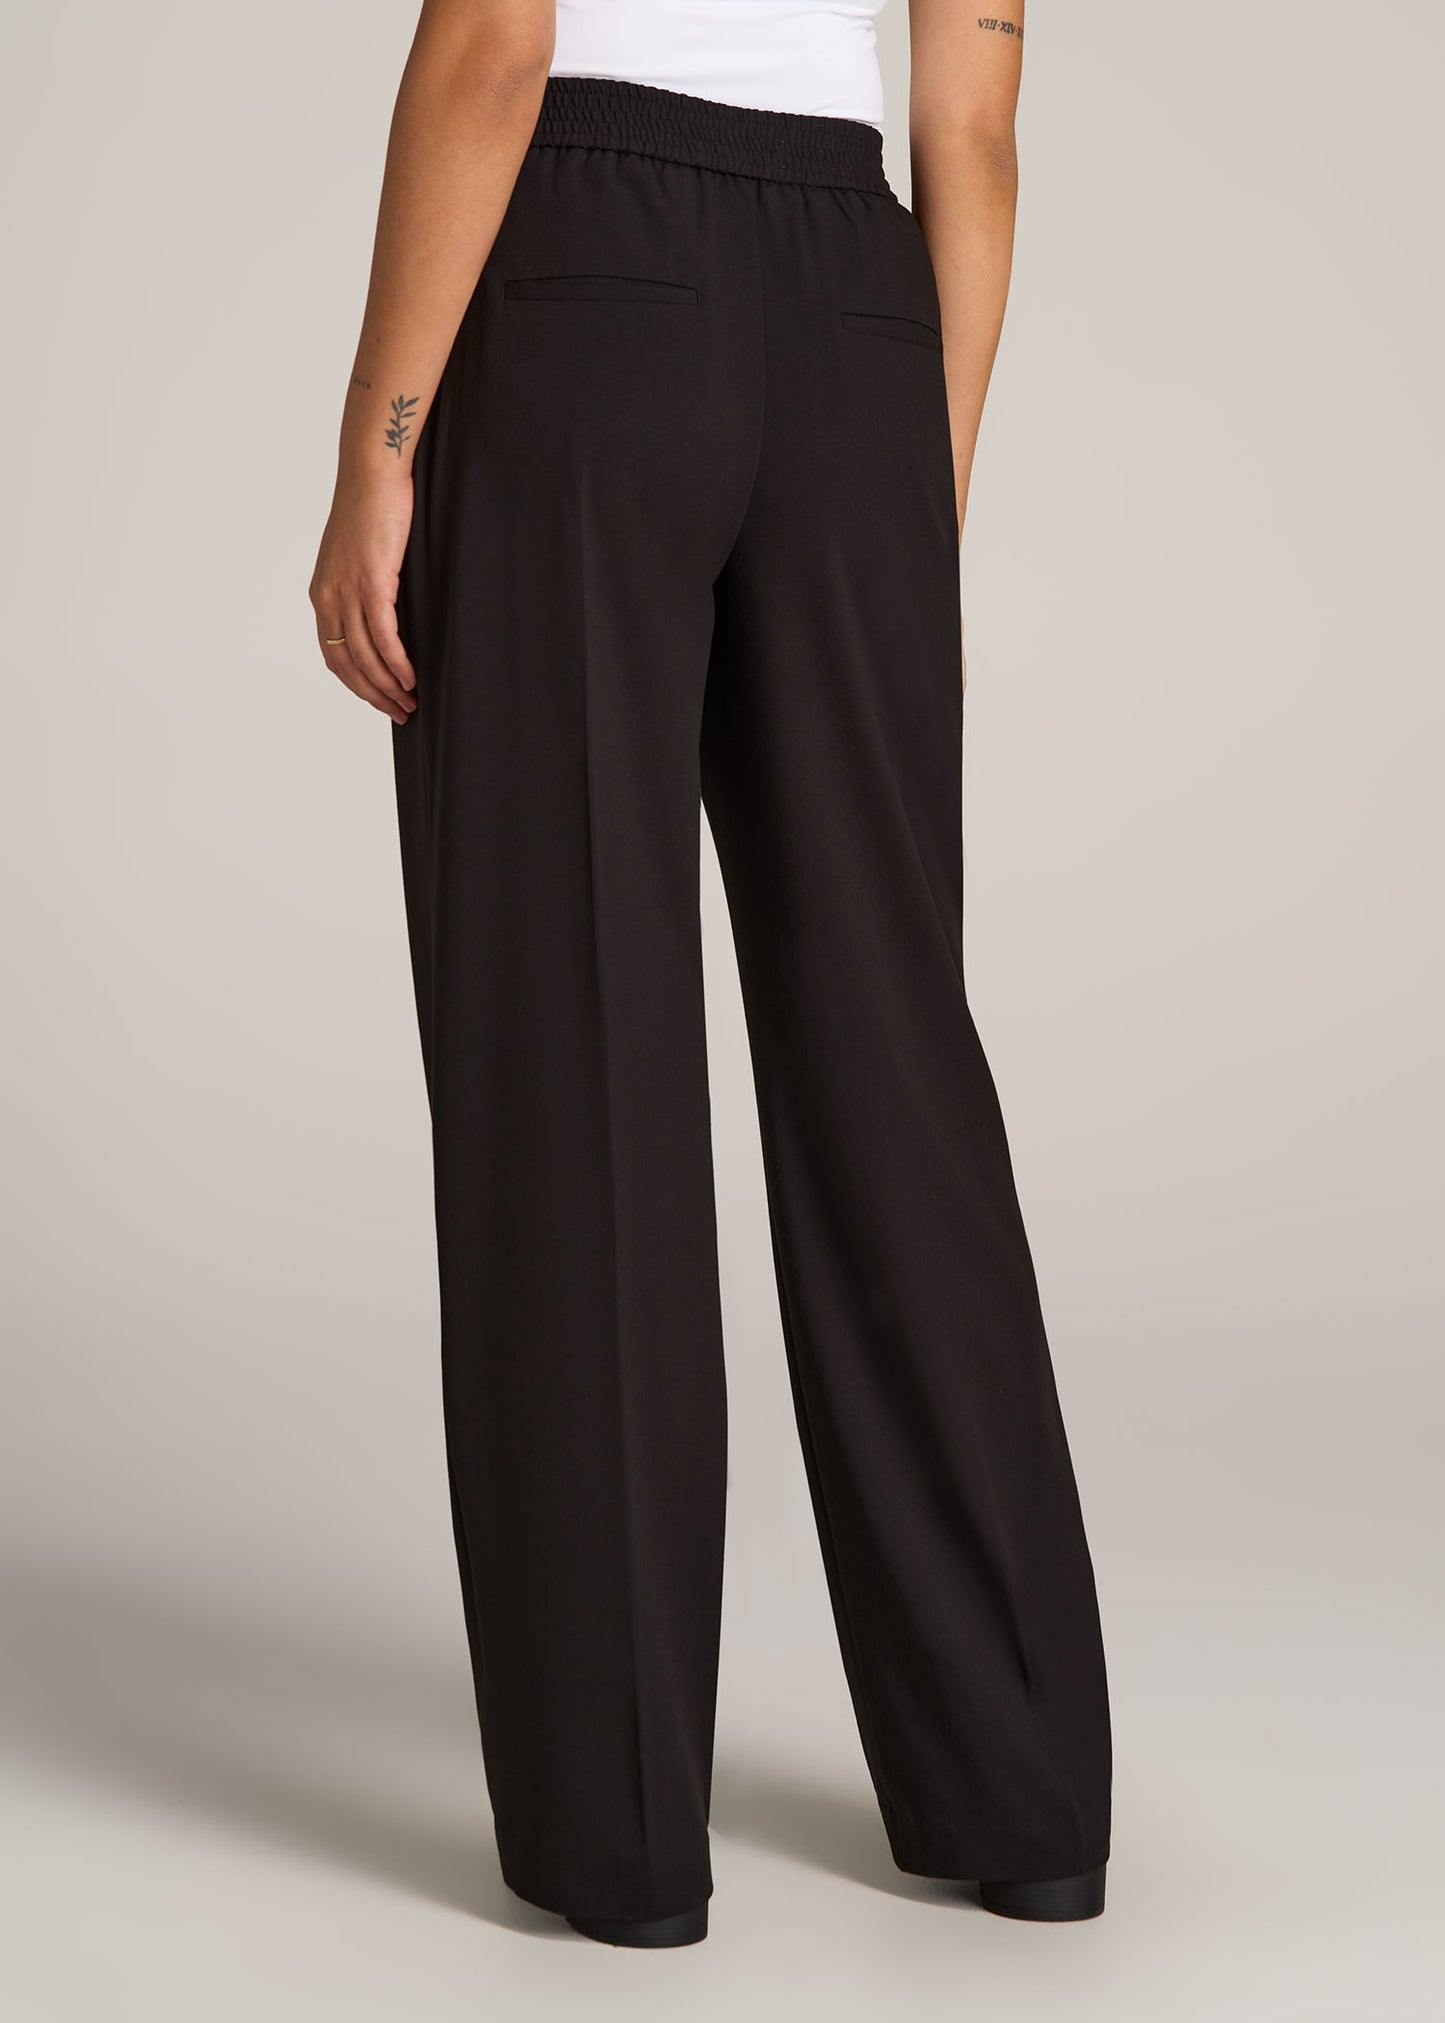 Flat Front Wide Leg Dress Pants for Tall Women in Fawn